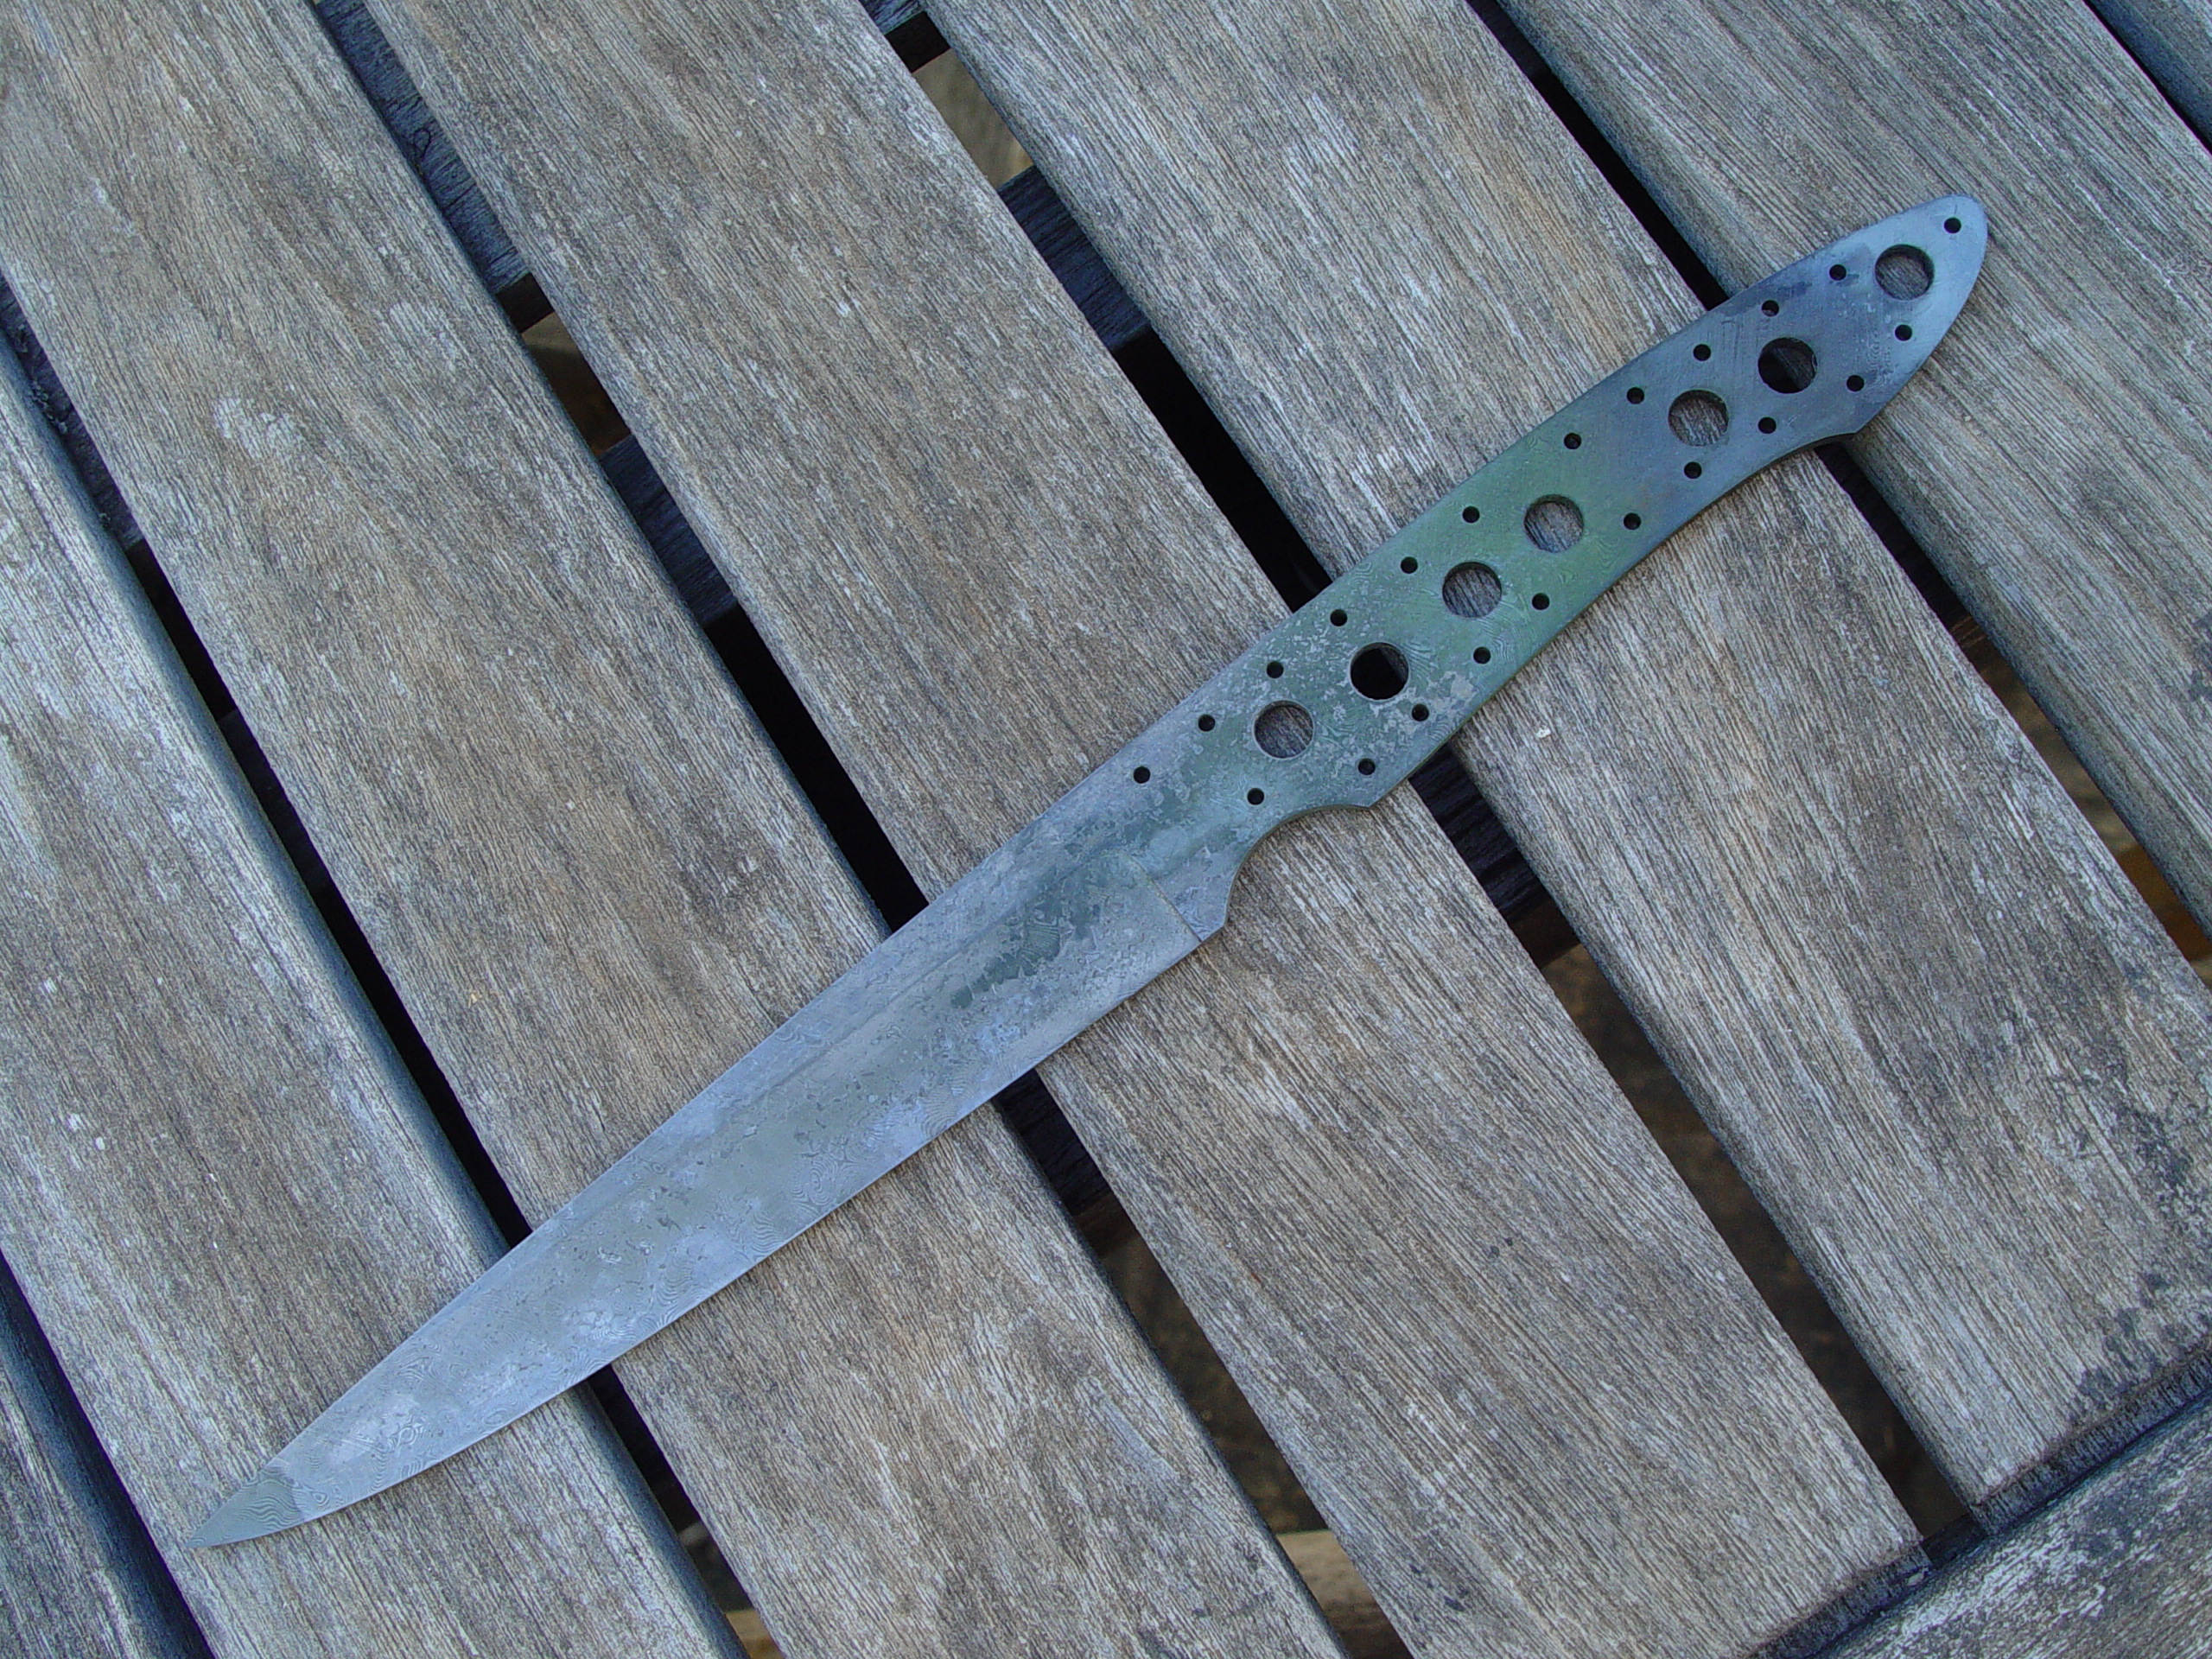 WIP of Utility blade for an Air Force mate in Cape Town, Just finished the heat treating.